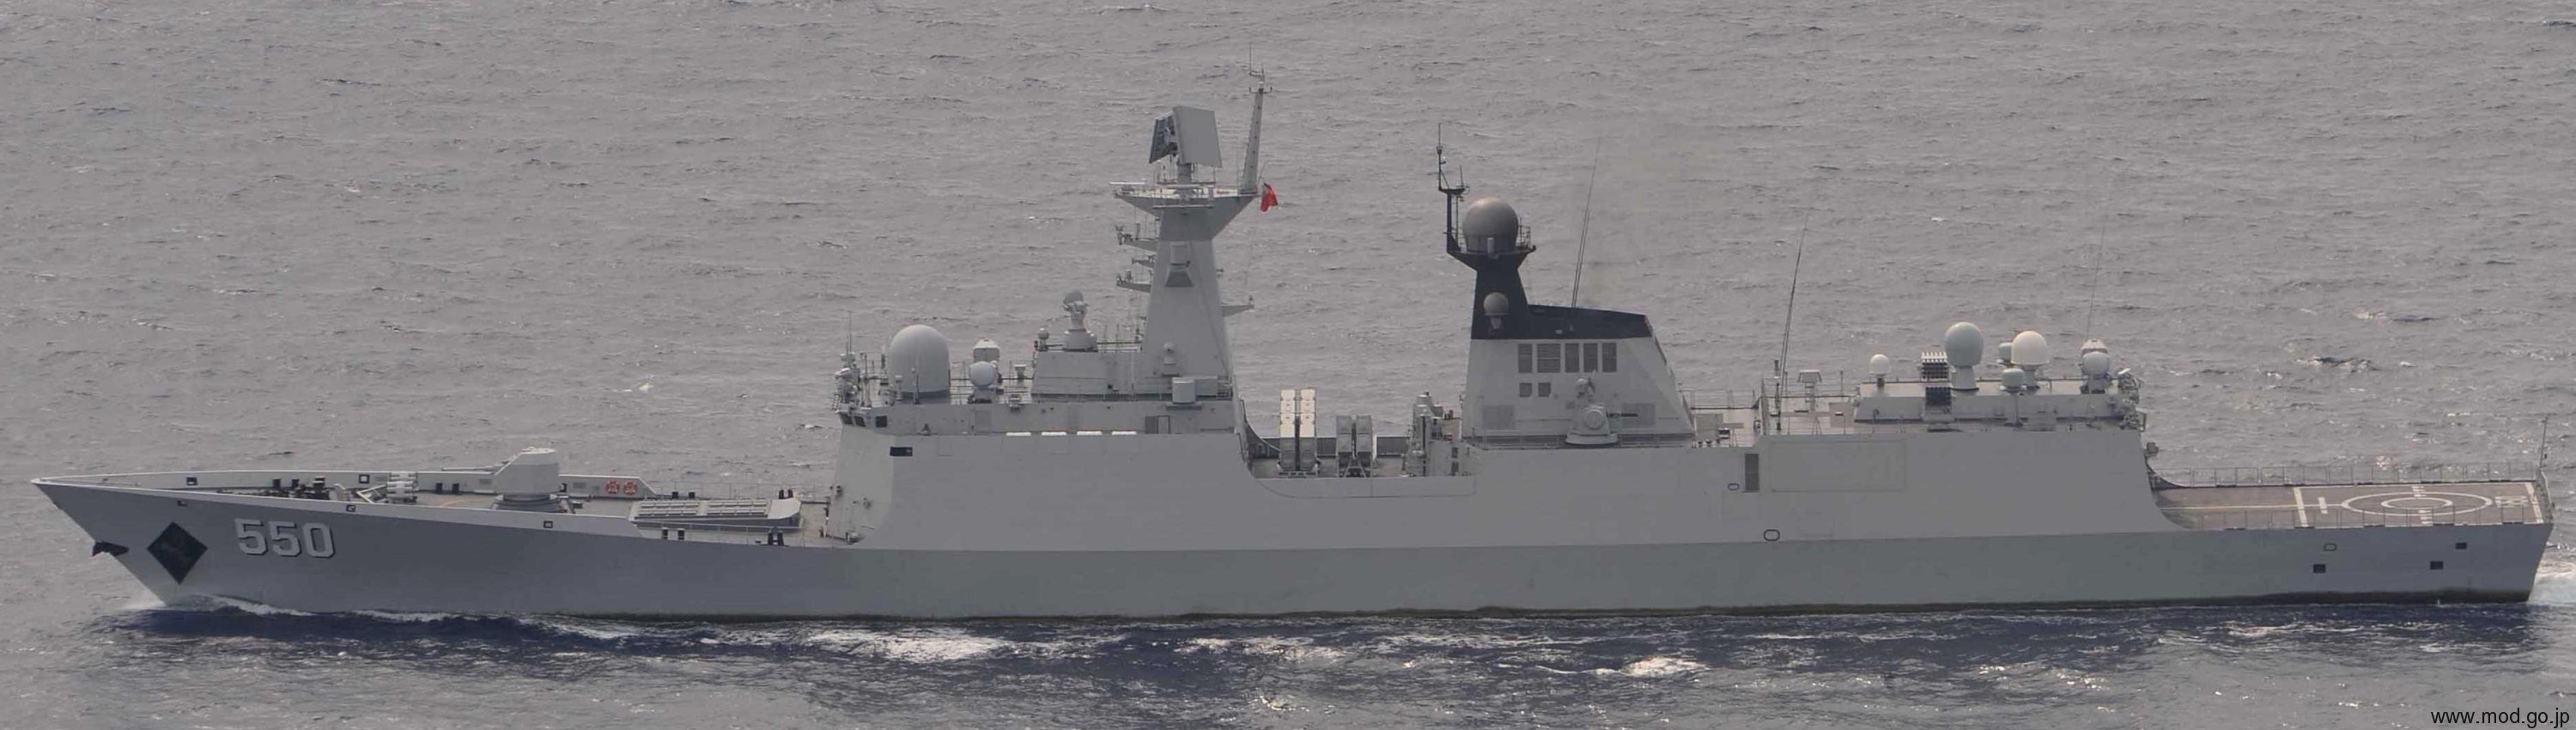 ffg-550 plans weifang type 054a jiangkai ii class guided missile frigate china people's liberation army navy 02